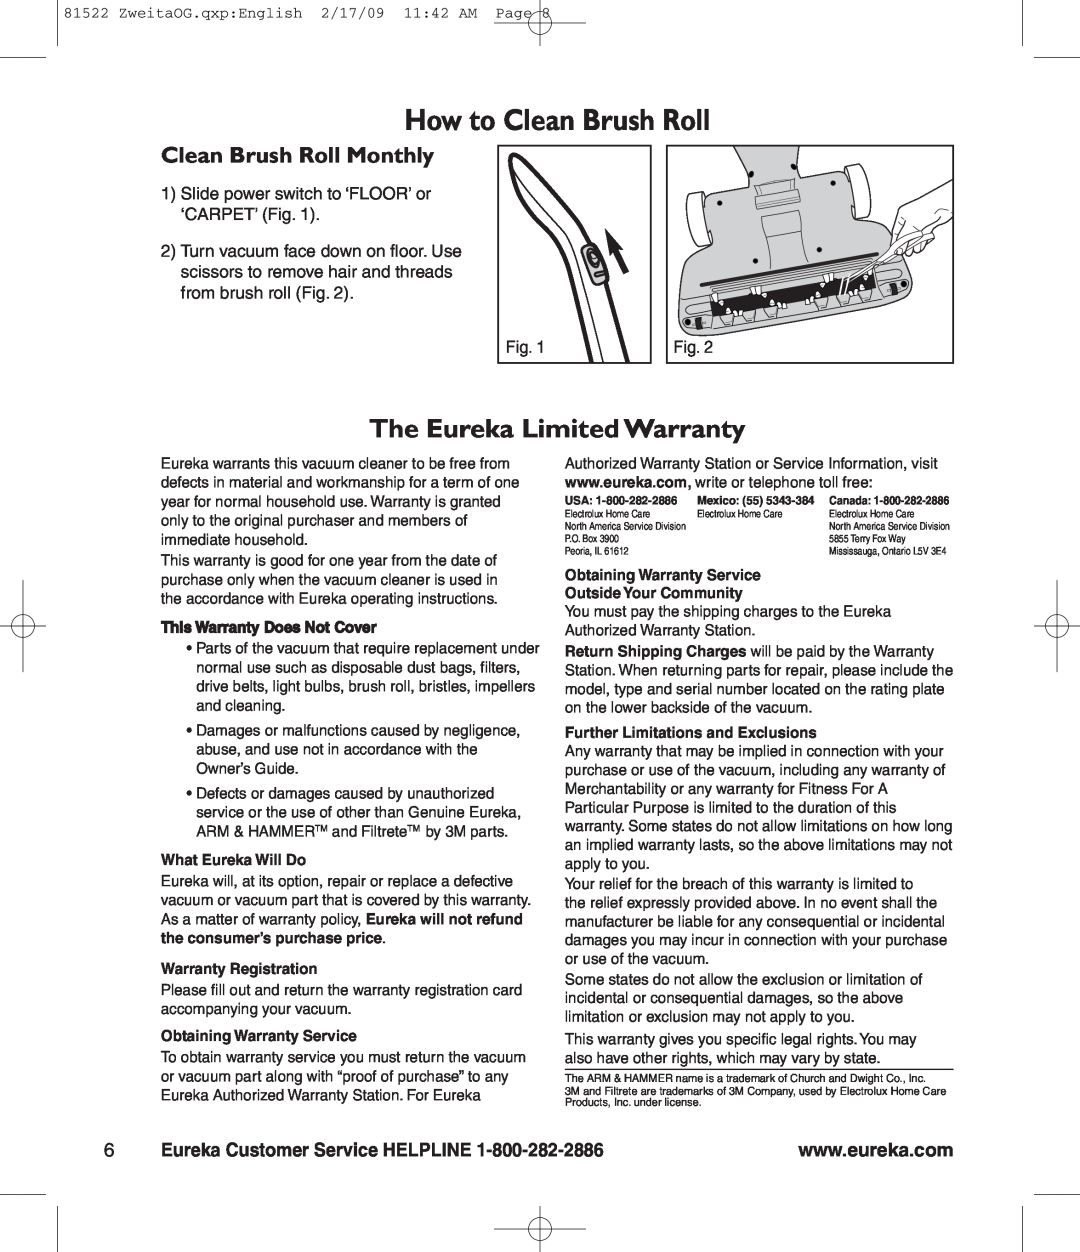 Eureka 580 How to Clean Brush Roll, Clean Brush Roll Monthly, The Eureka Limited Warranty, This Warranty Does Not Cover 